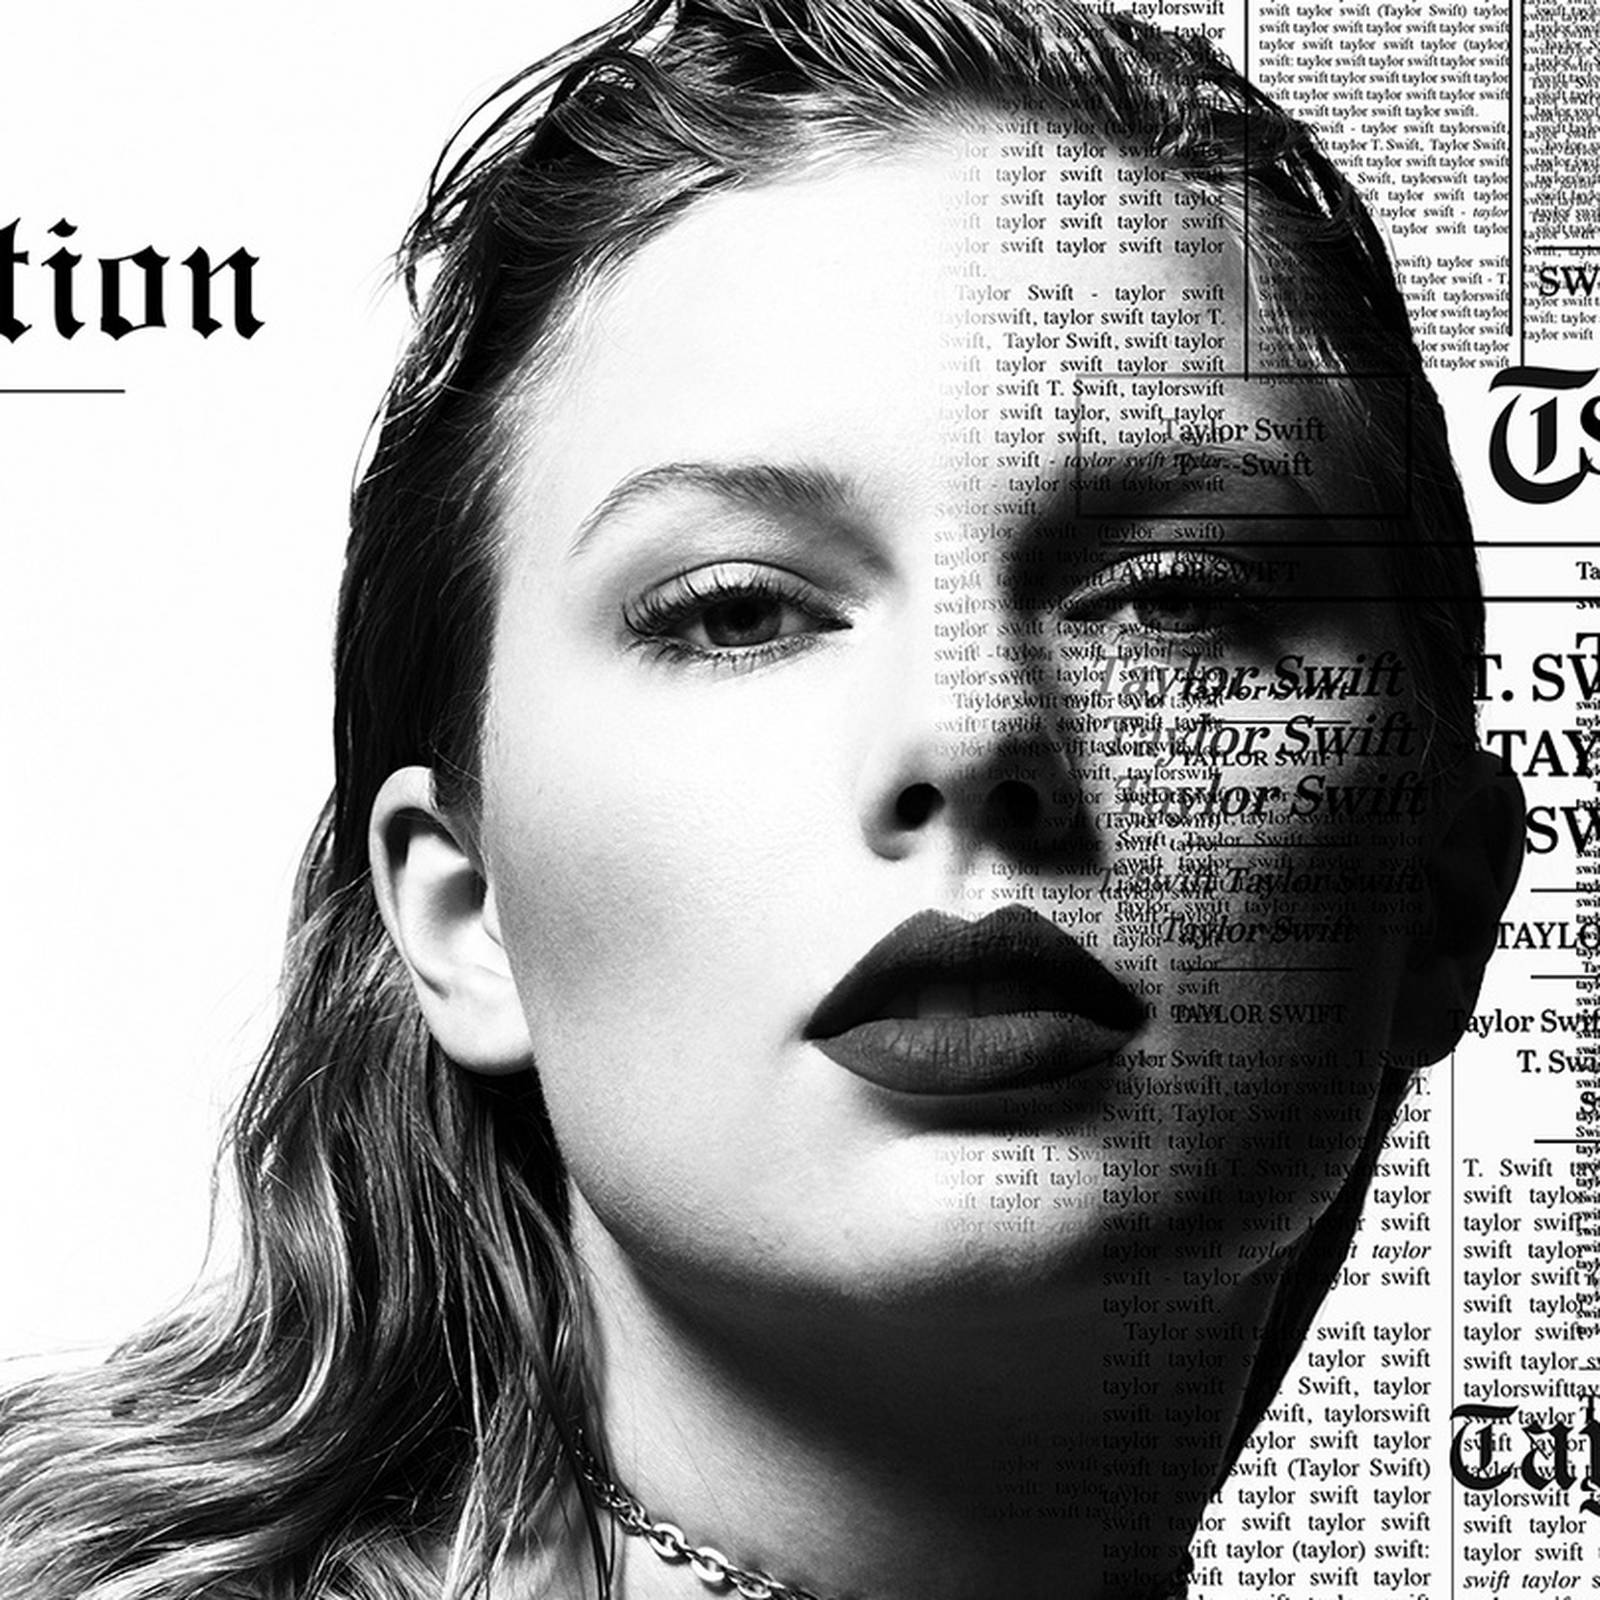 Taylor Swift: Reputation – clever songwriting, beauty in tiny